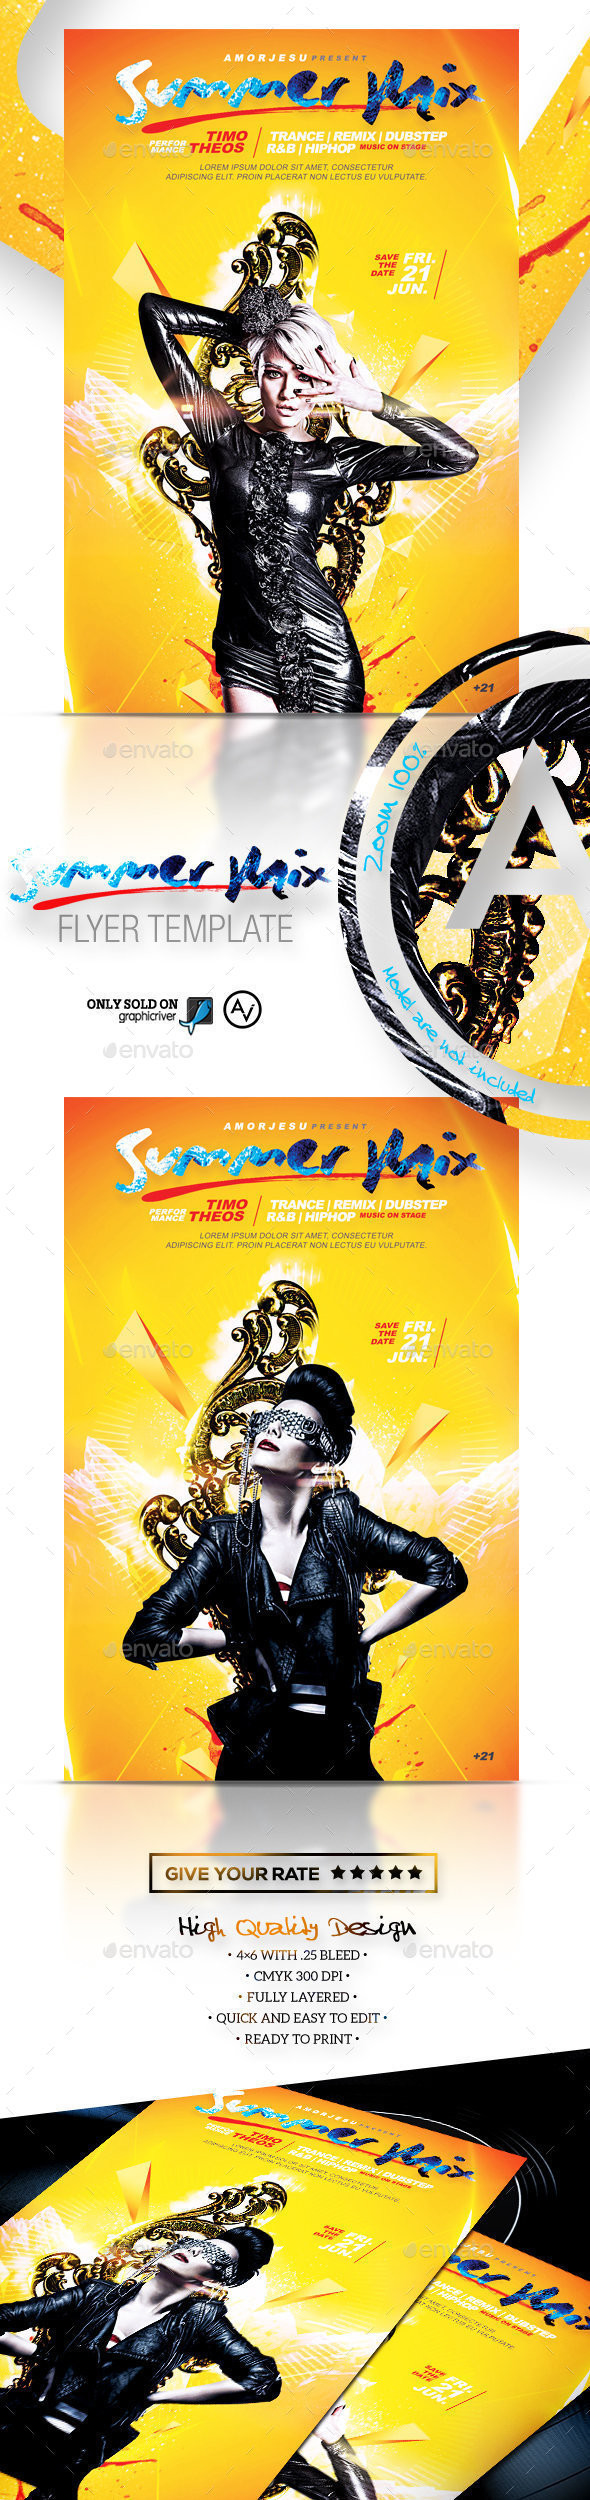 Preview 20  20summer 20mix 20flyer 20template 20 design 20by 20amorjesu 